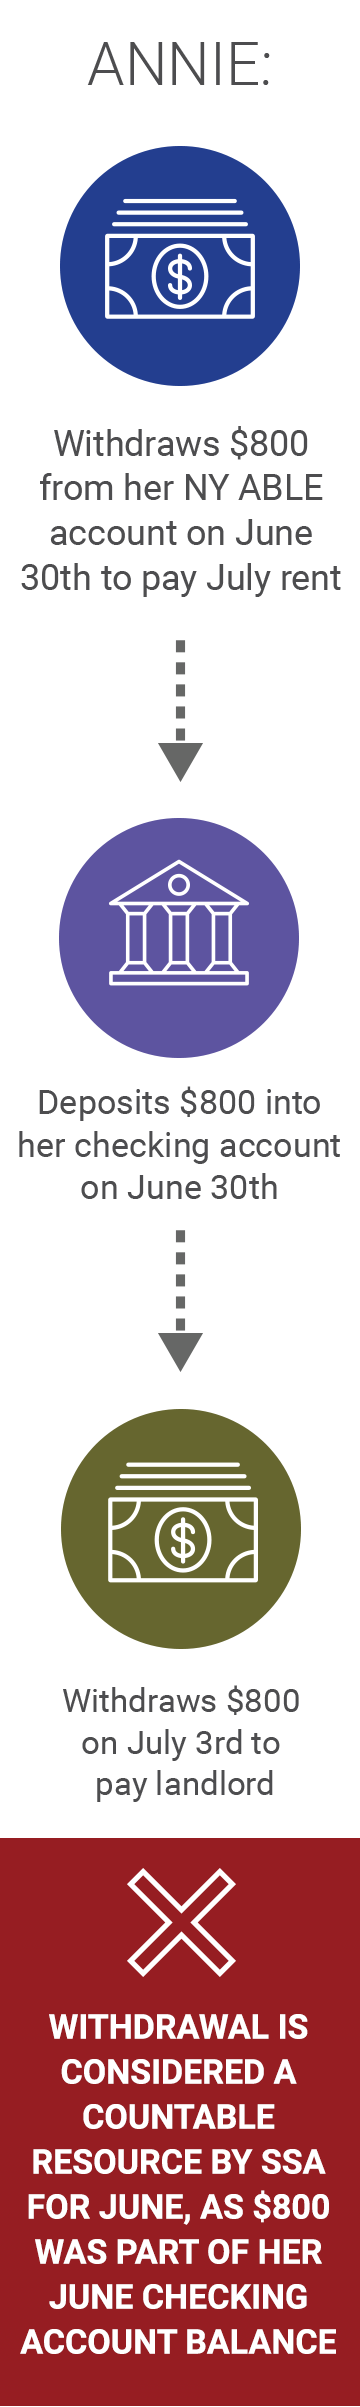 Annie’s scenario begins with her withdrawal of $800 from her NY ABLE account on June 30th to pay July rent. She then deposits $800 into her checking account on June 30th. Finally, Annie withdraws $800 on July 3rd to pay her landlord. Big red “X” icon for this scenario signifies that this withdrawal is considered a countable resource by SSA for June, as $800 was part of her June checking account balance.